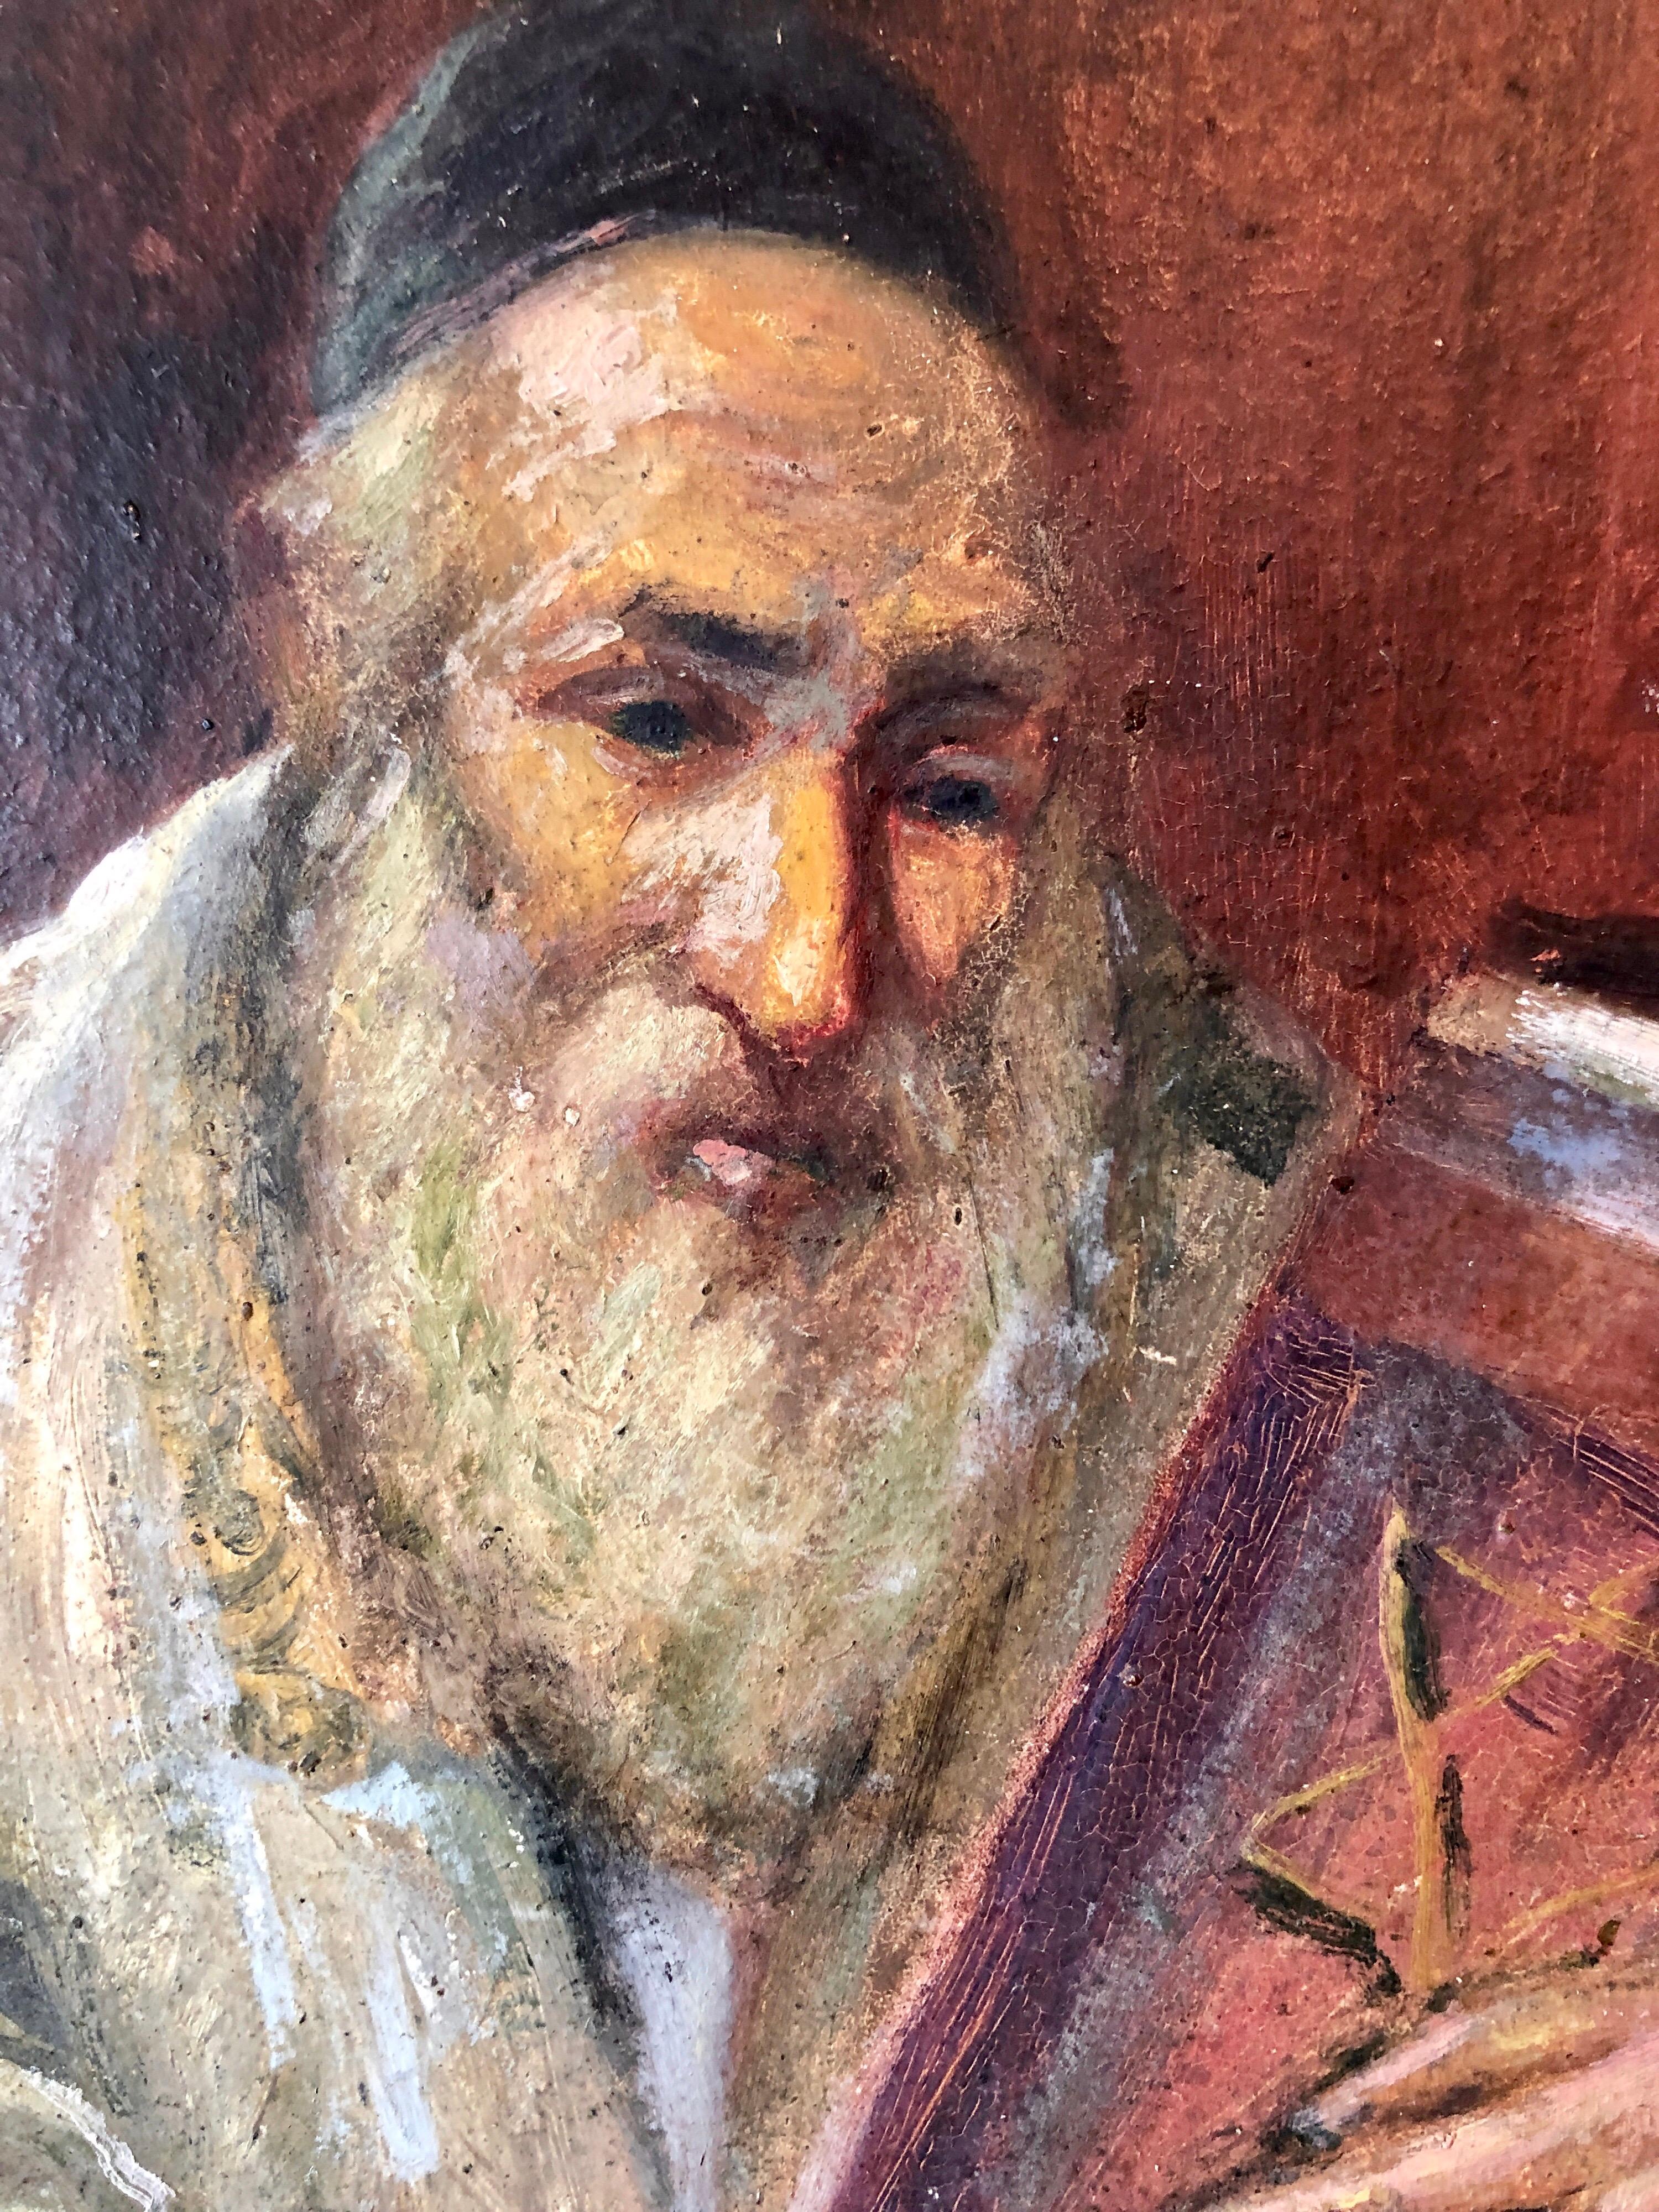 Judaica Oil Painting Chassidic Jewish Rabbi Holding A Sefer Torah Scroll - Brown Figurative Painting by Mark Siegband